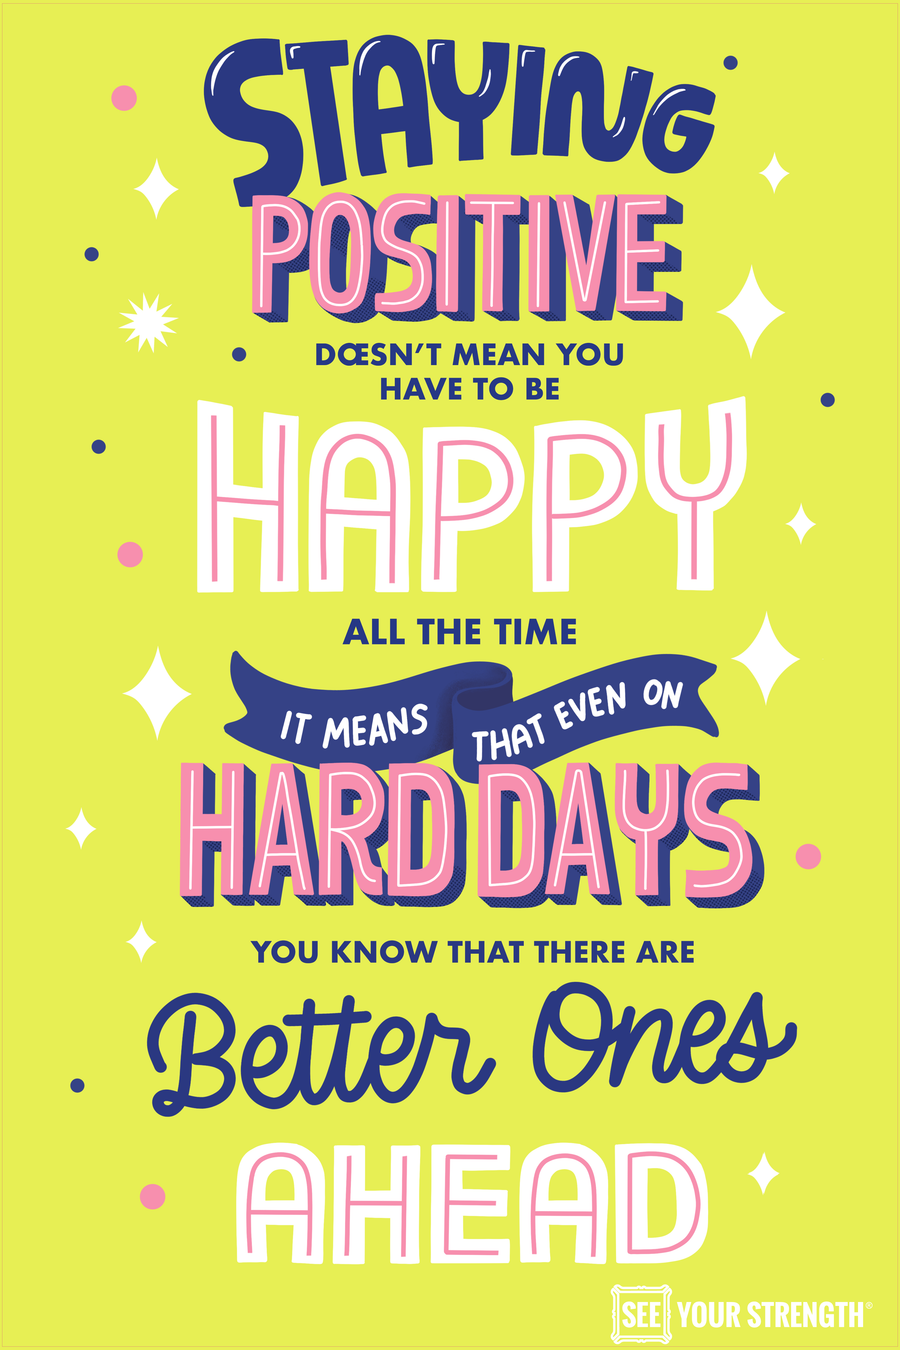 Staying positive doesn't mean you have to be happy all the time. It means that even on hard days you know that there are better ones ahead.